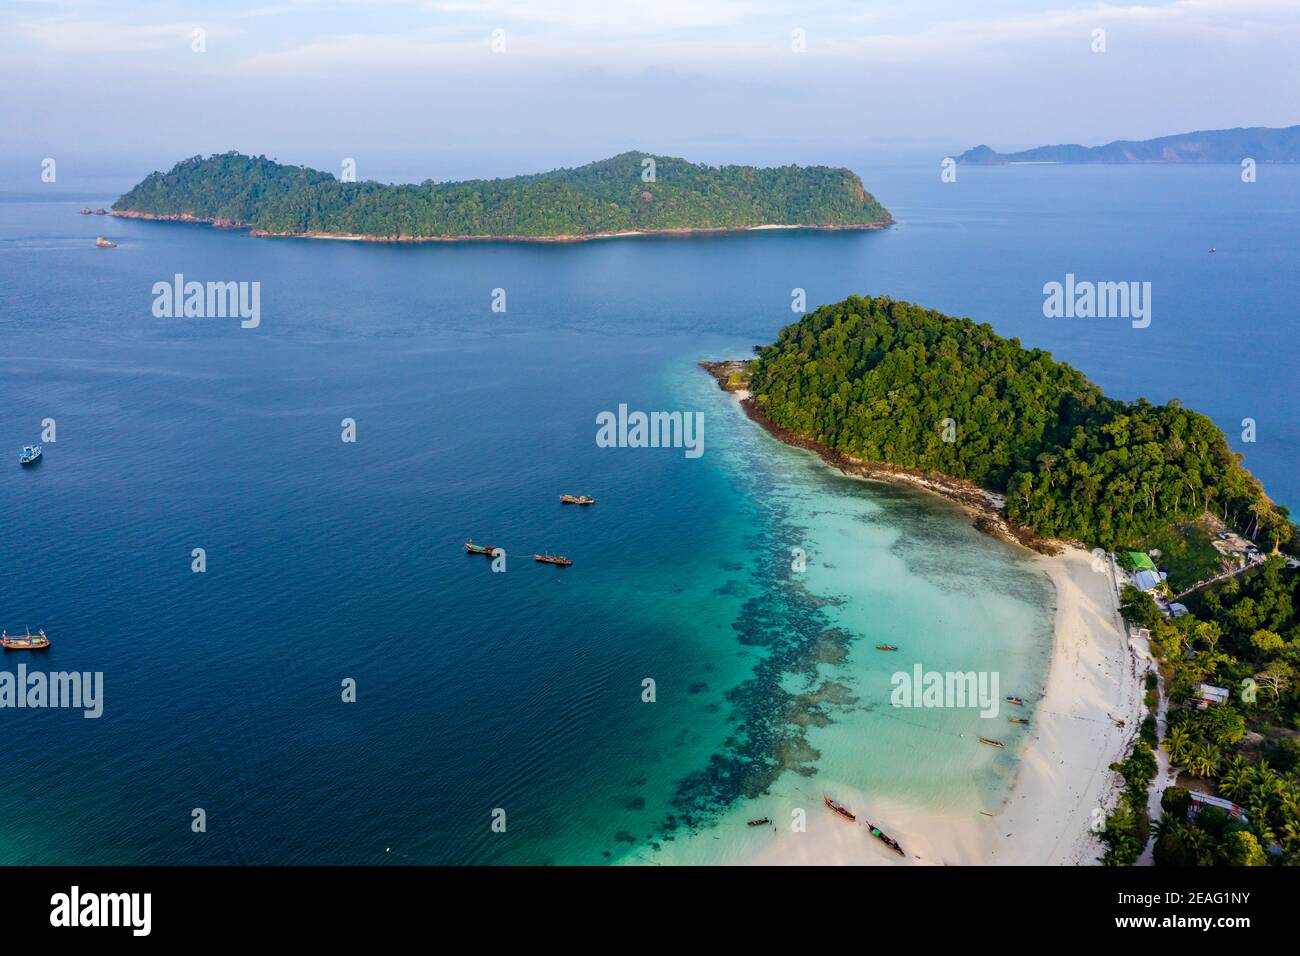 Aerial drone view of traditional longtail fishing boats in a lagoon on a tropical island (Kyun Phi Lar, Myanmar) Stock Photo